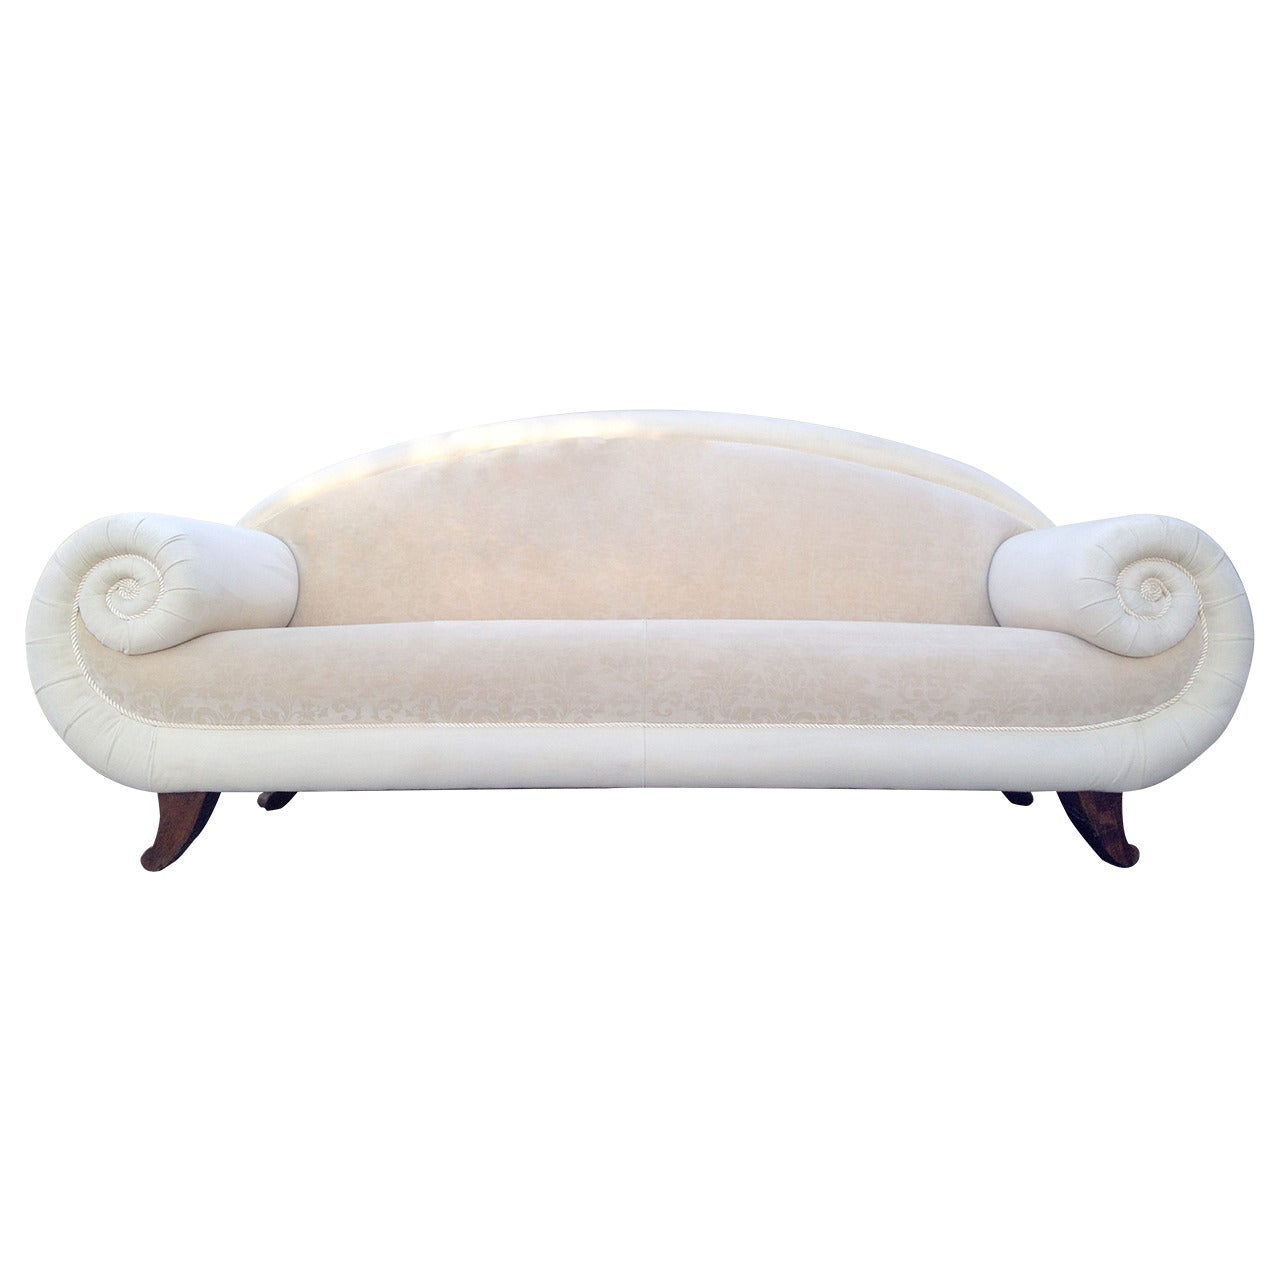 Extravagant Hollywood Regency Sofa with Scrolled Arms